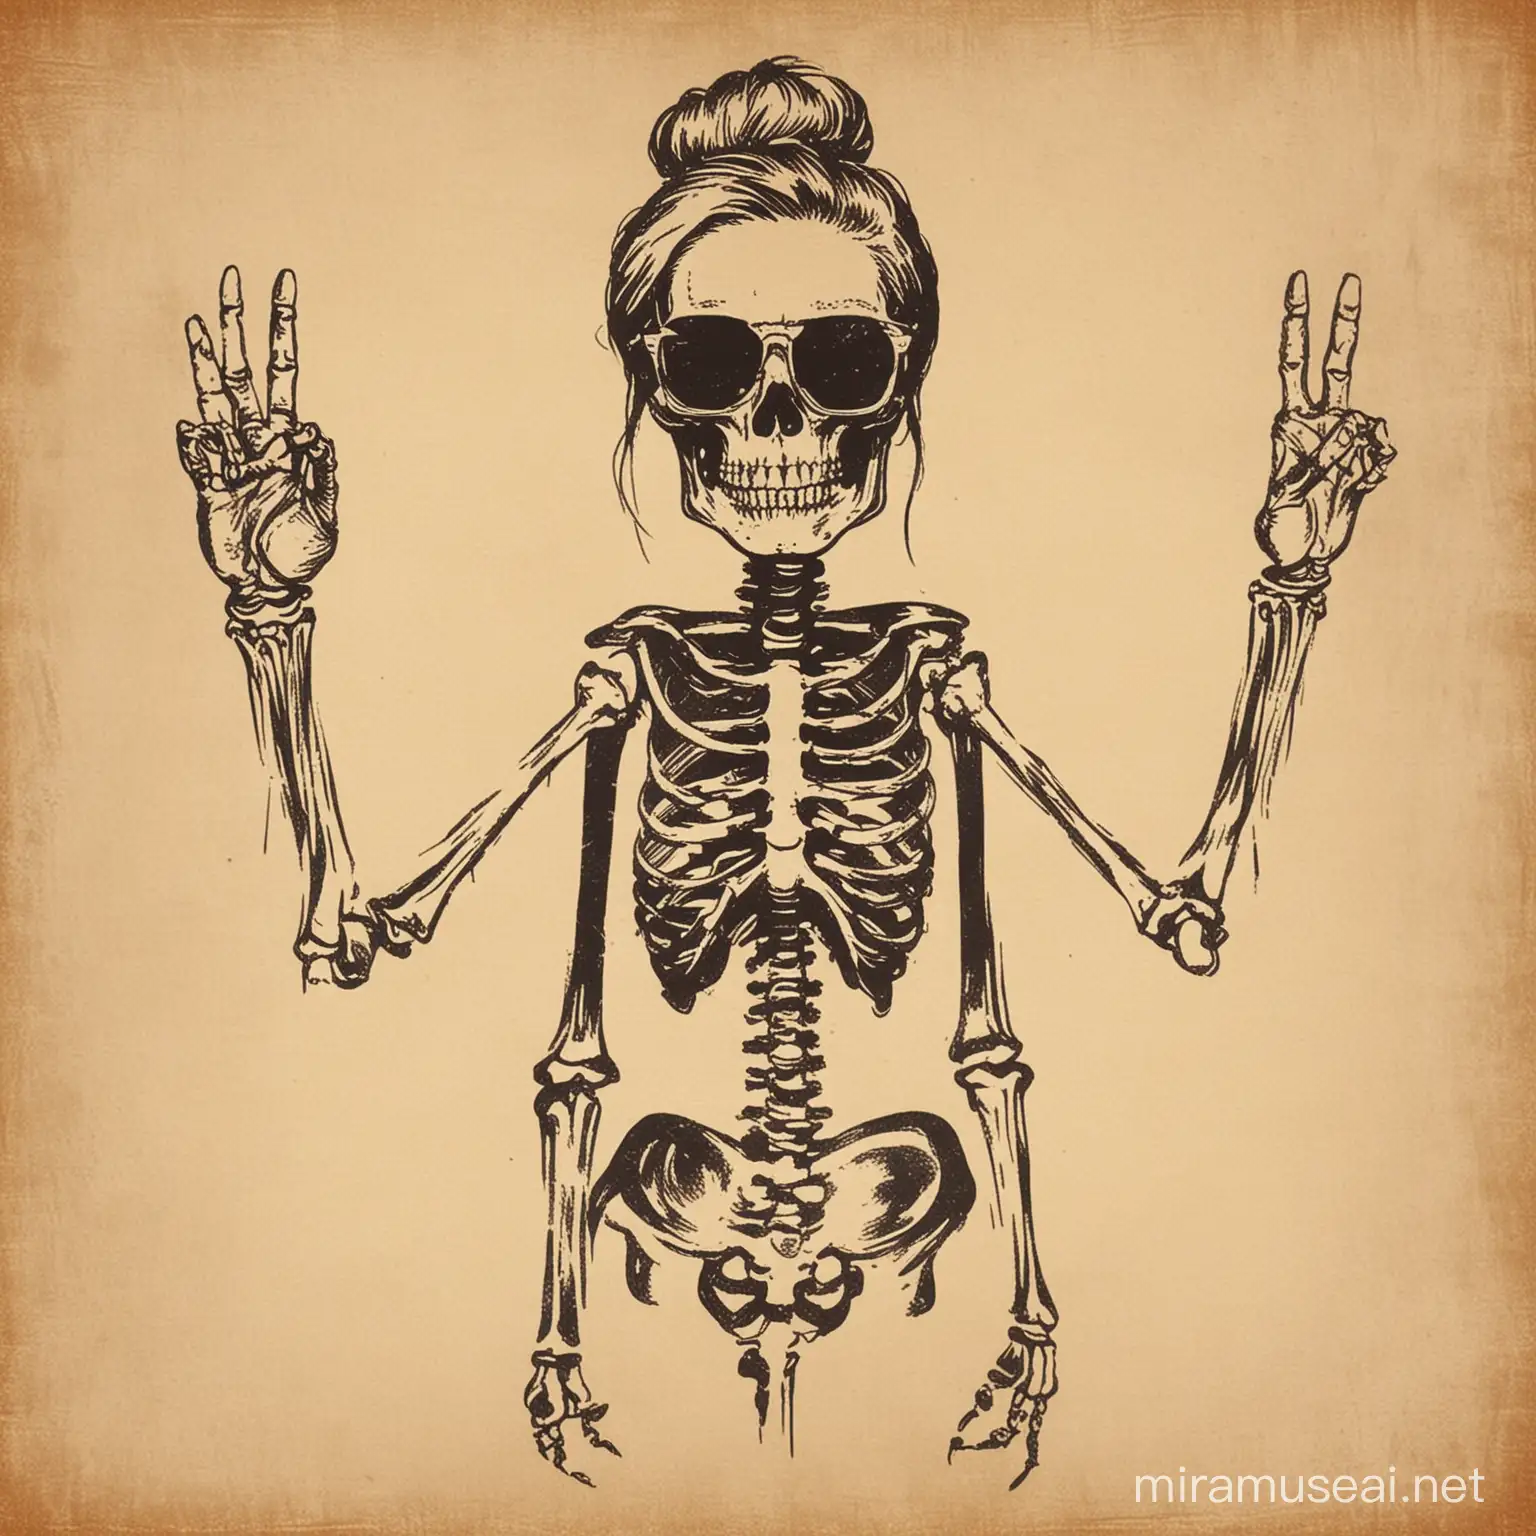 Vintage Skeleton with Bun Hairstyle and Glasses Holding Two Fingers Up